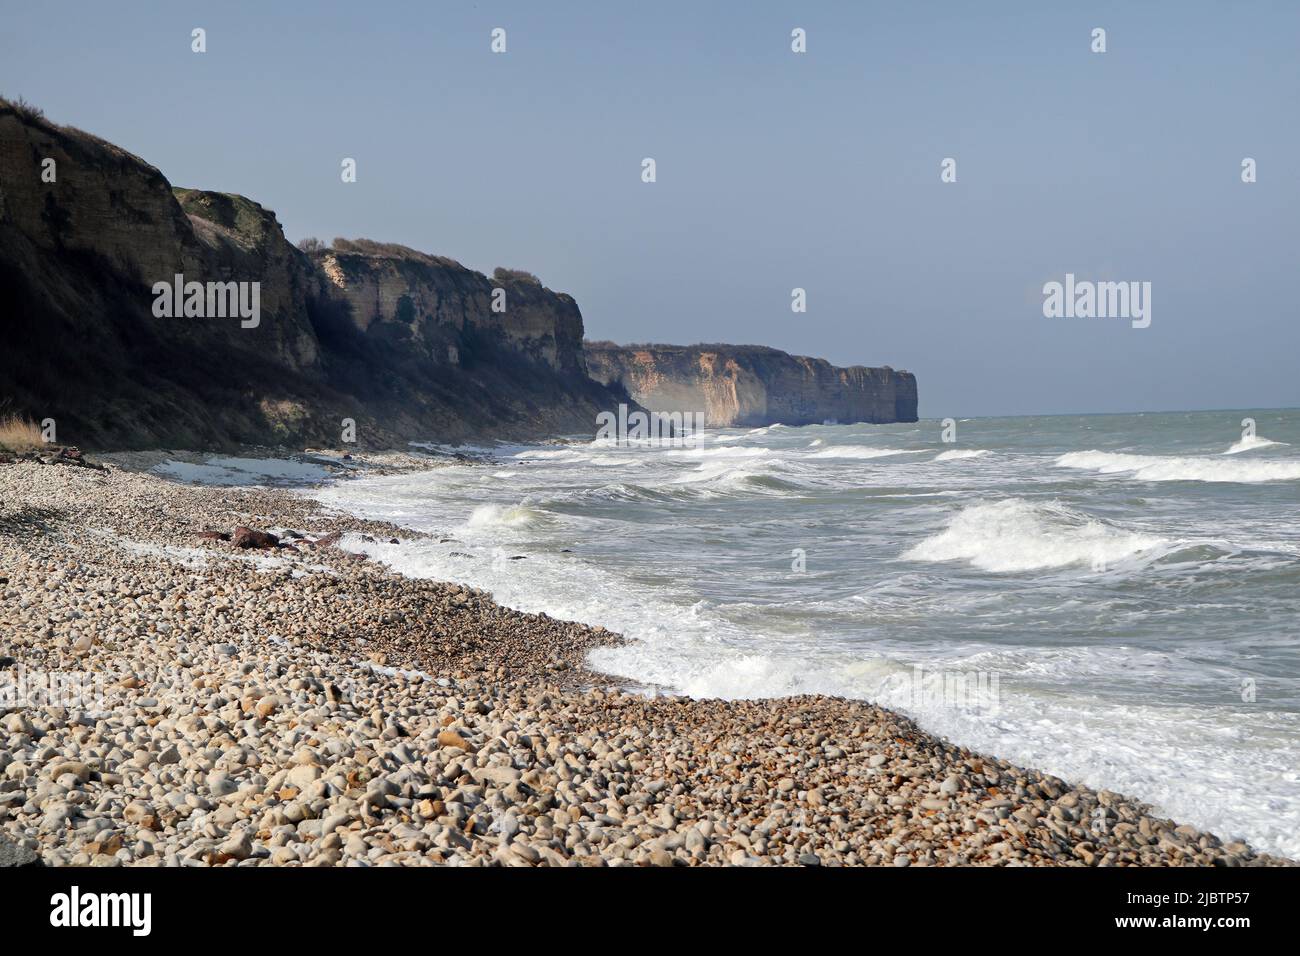 Cliffs on the West side of Omaha Beach, Saint-Laurent-sur-Mer, Normandy, France Stock Photo